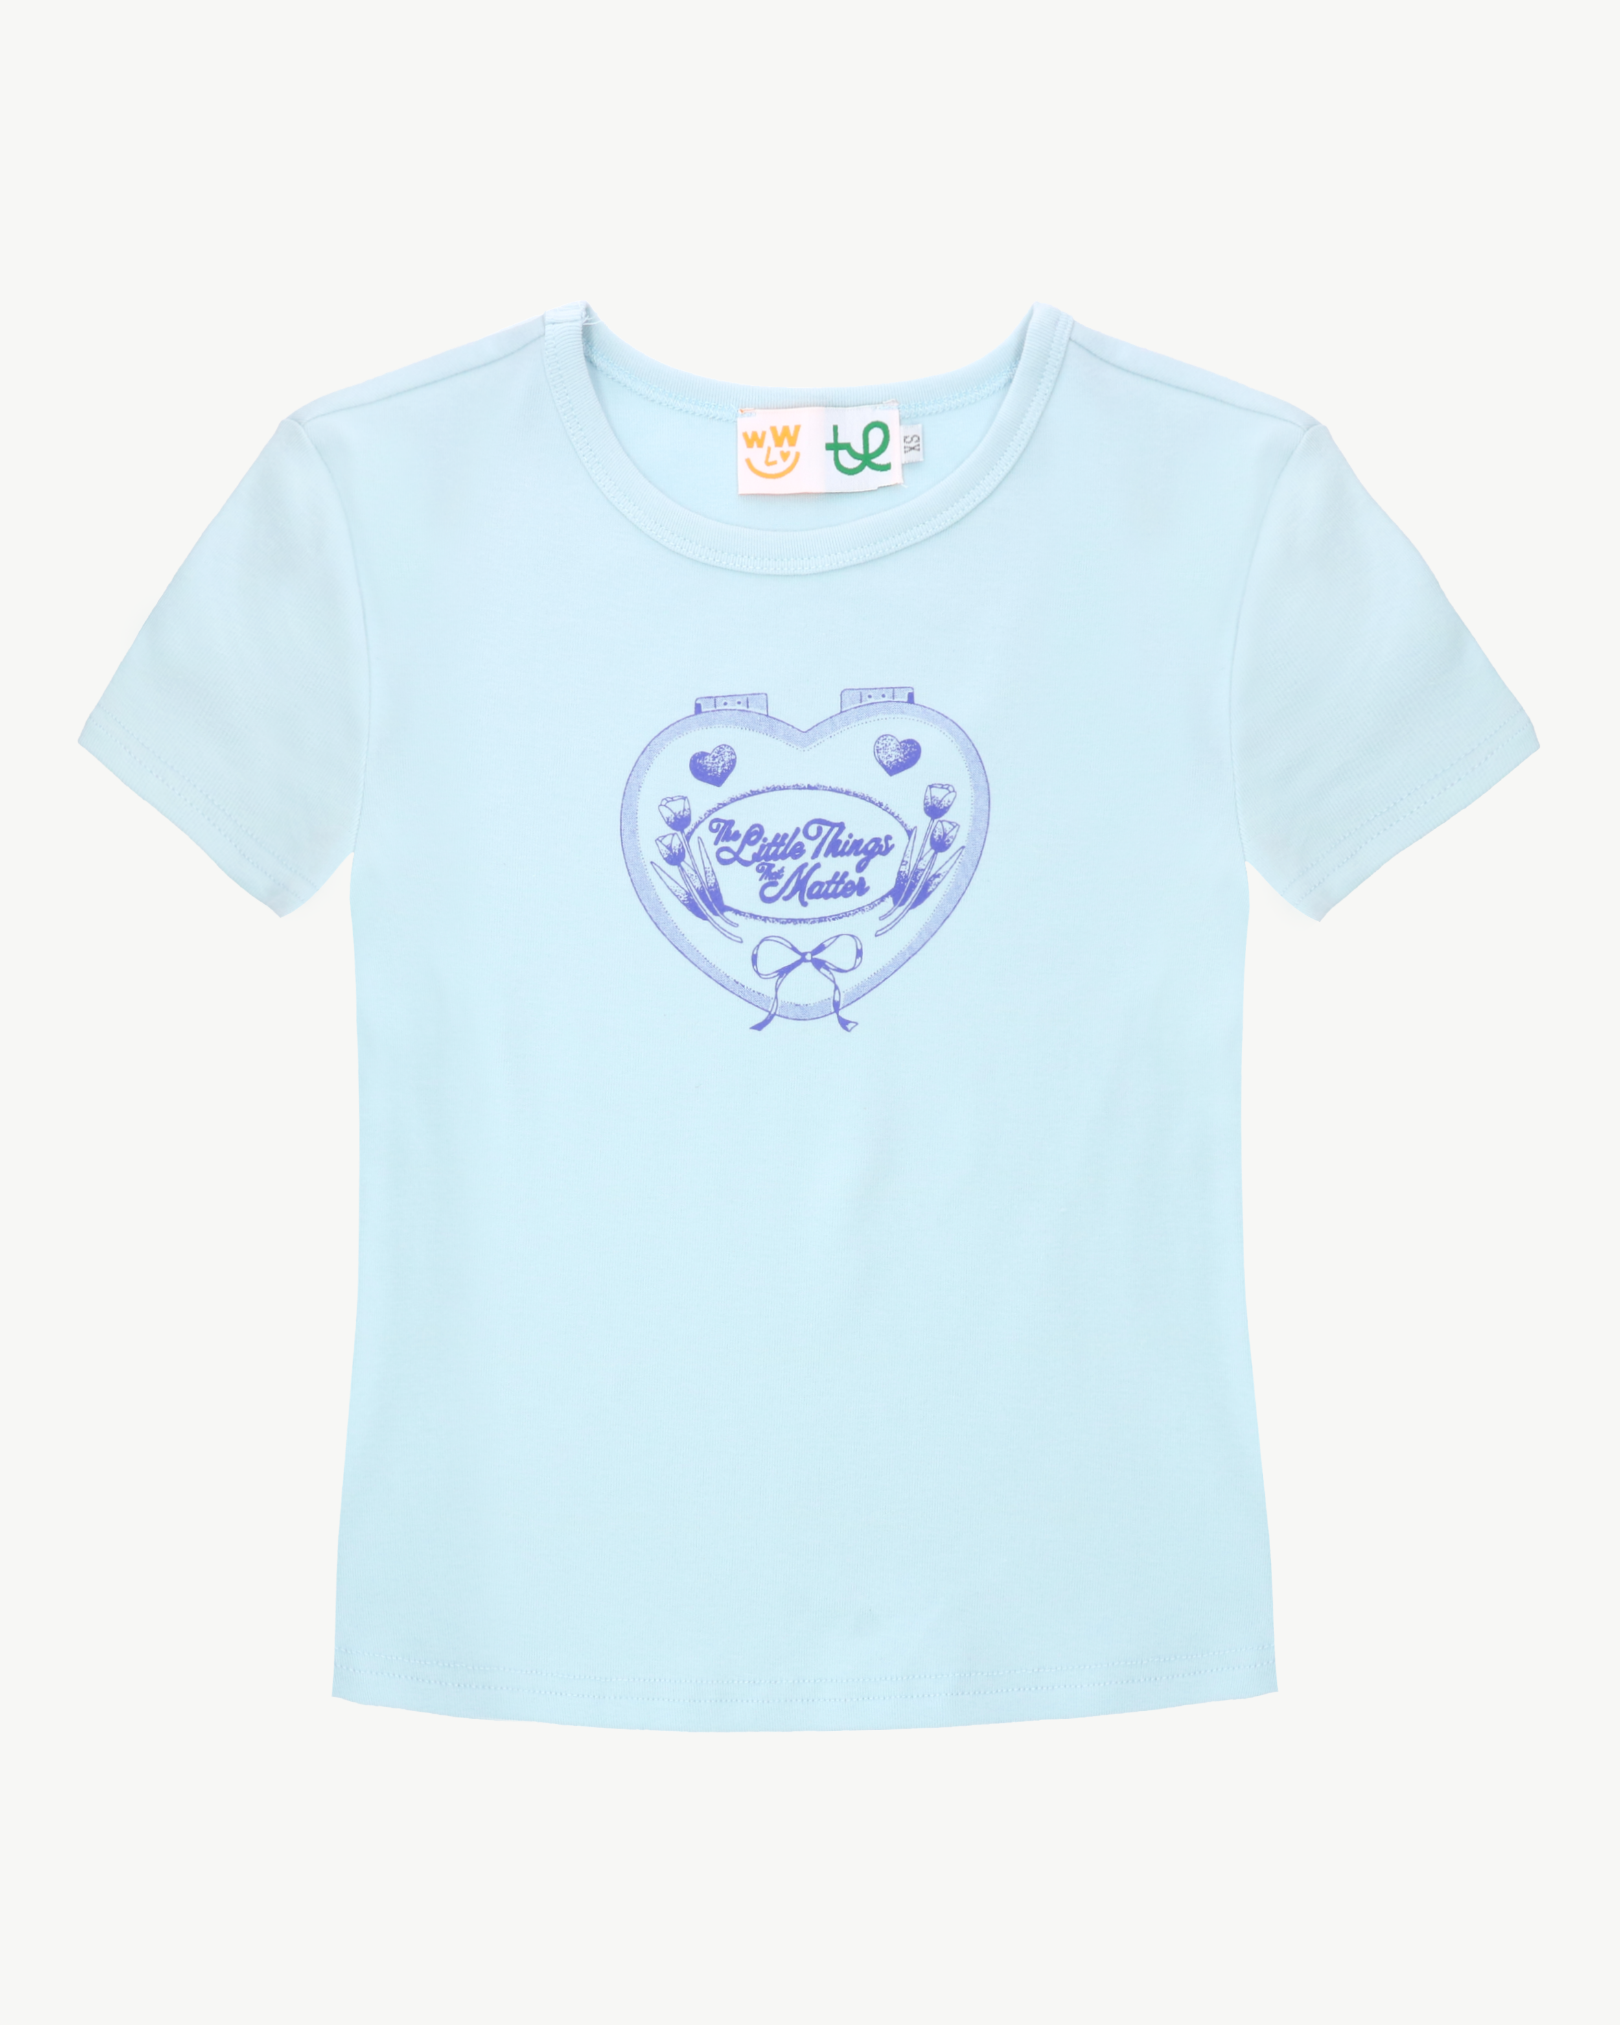 The Little Things That Matter Baby Tee - Baby Blue